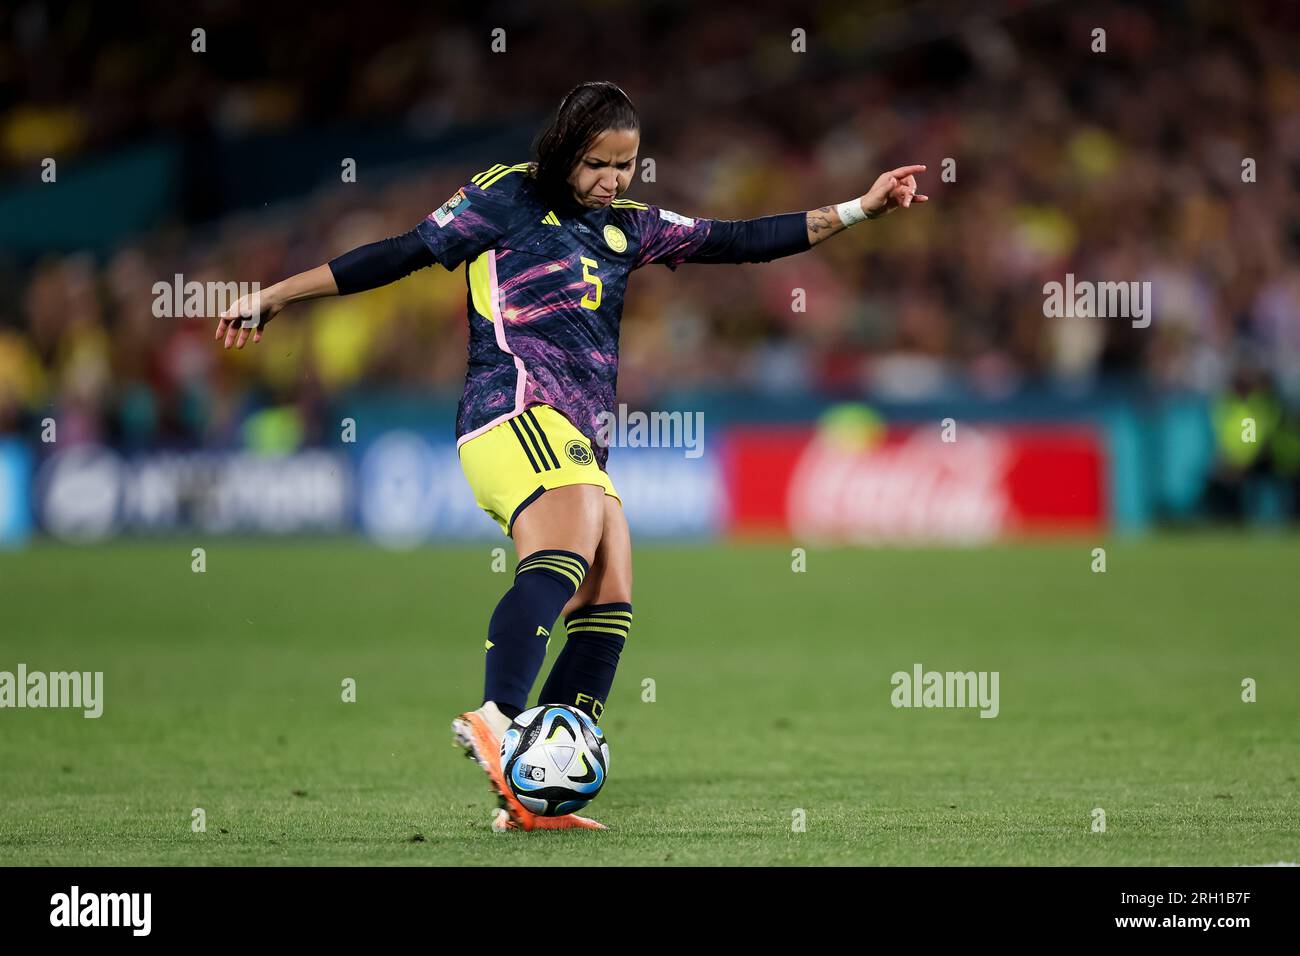 Sydney, Australia, 12 August, 2023. Lorena Bedoya Durango of Colombia shoots at goal during the Women's World Cup quarter final football match between the England and Colombia at Stadium Australia on August 12, 2023 in Sydney, Australia. Credit: Damian Briggs/Speed Media/Alamy Live News Stock Photo